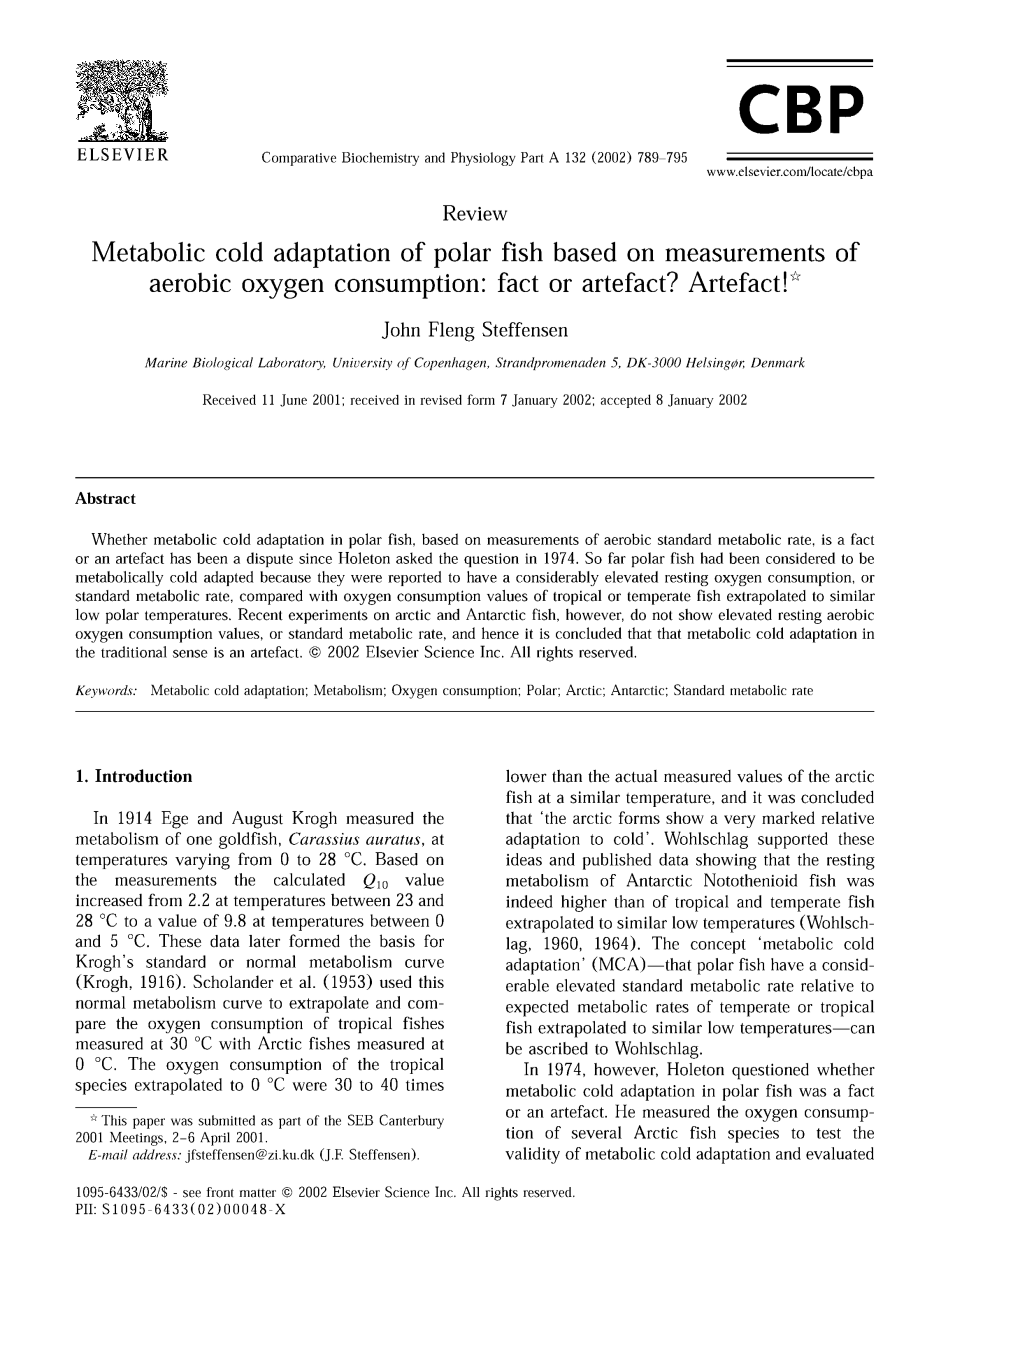 Metabolic Cold Adaptation of Polar Fish Based on Measurements of Aerobic Oxygen Consumption: Fact Or Artefact? Artefacte